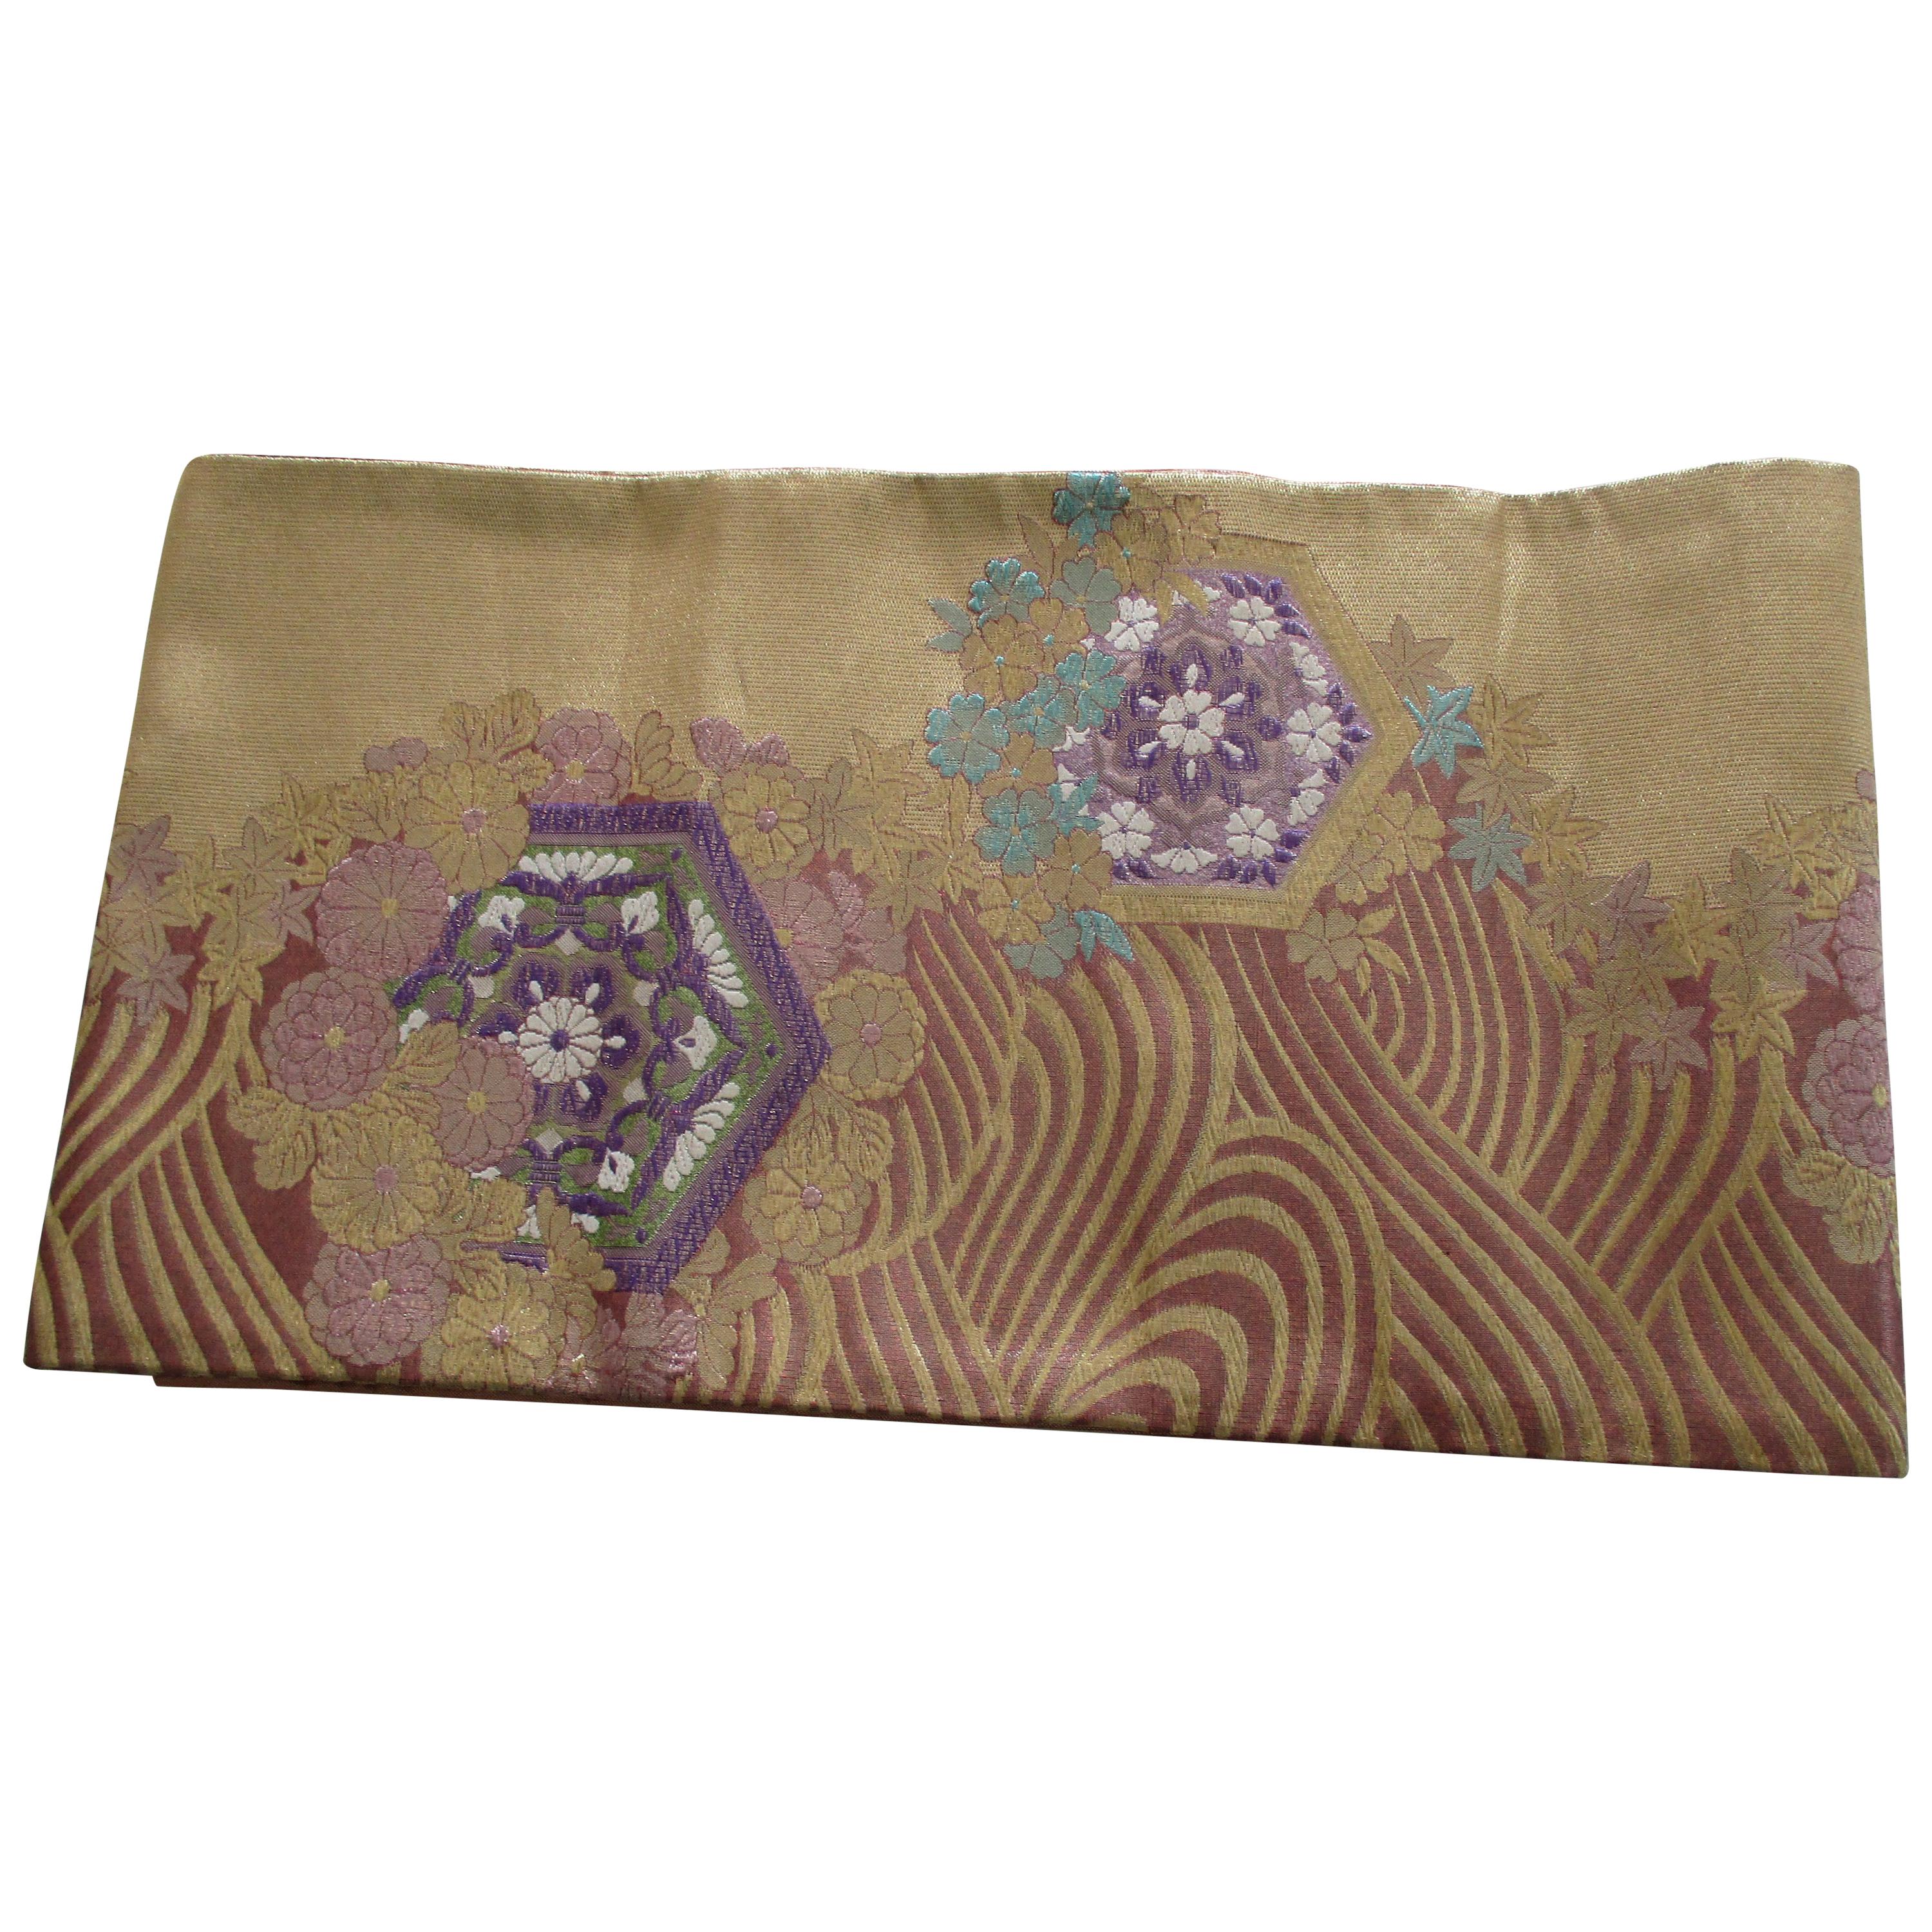 Long Golden Textured Woven Obi Textile Depicting Flowers in Bloom